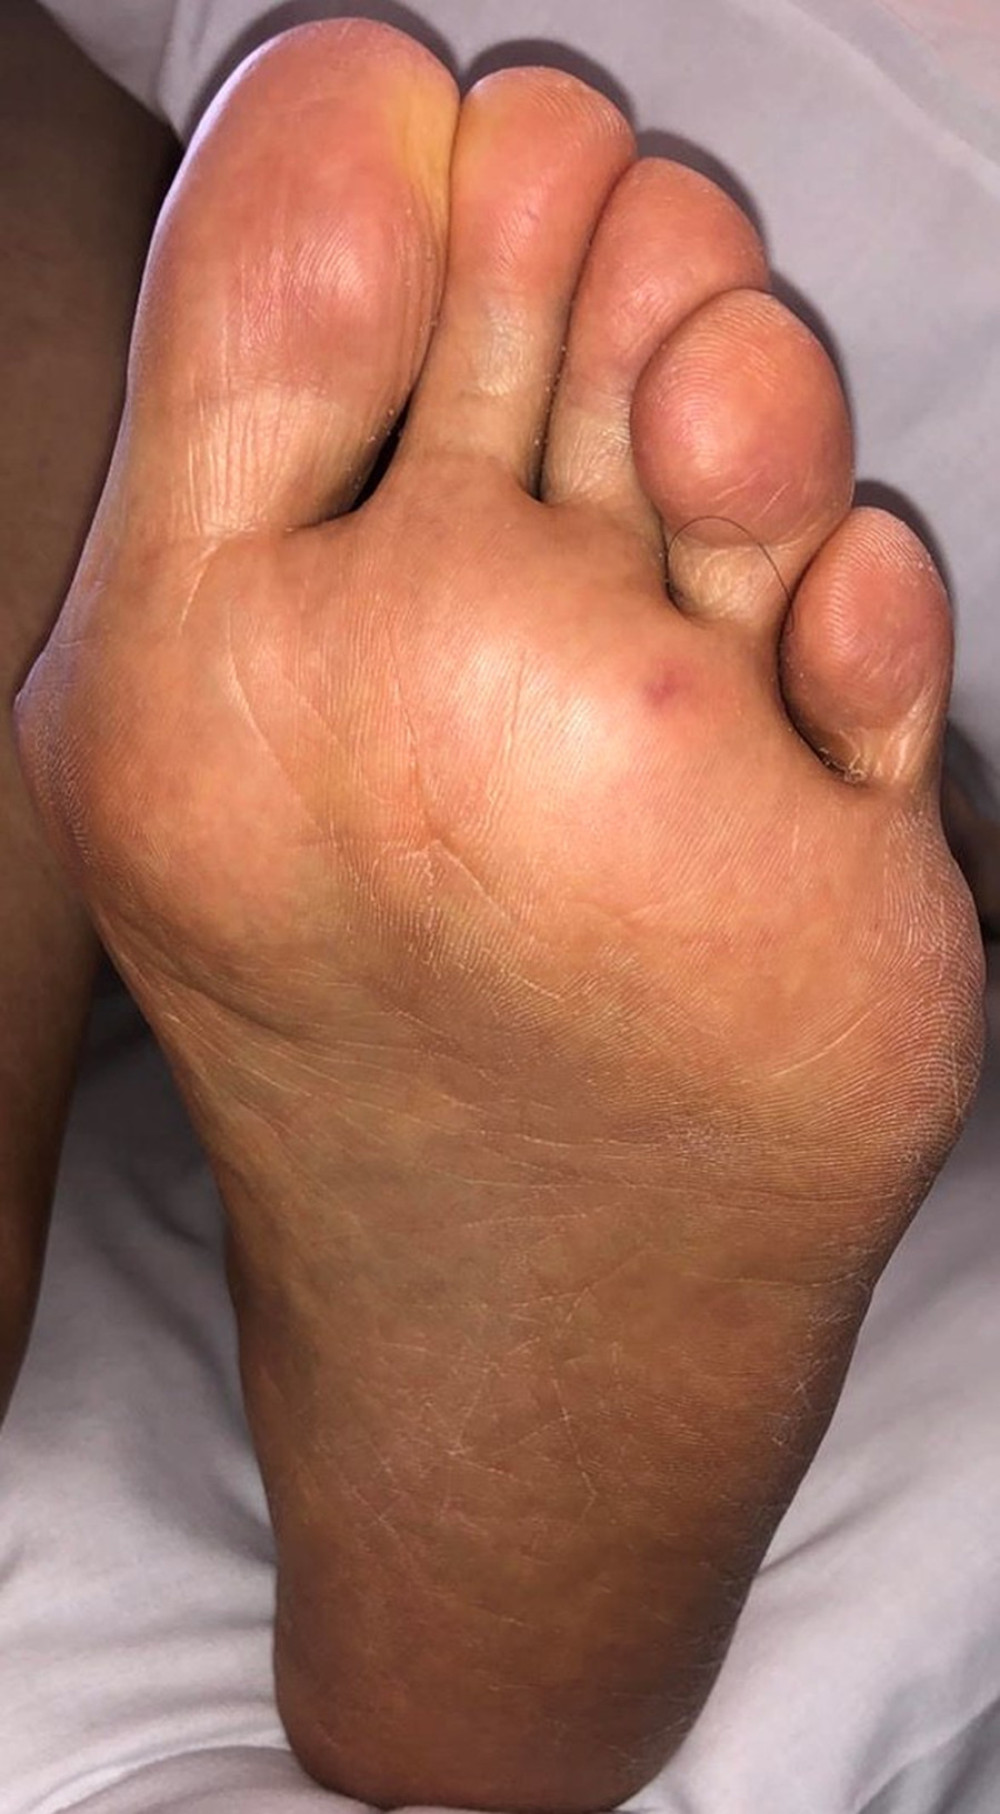 Painless nodules (Janeway lesions) on the sole of the left foot.